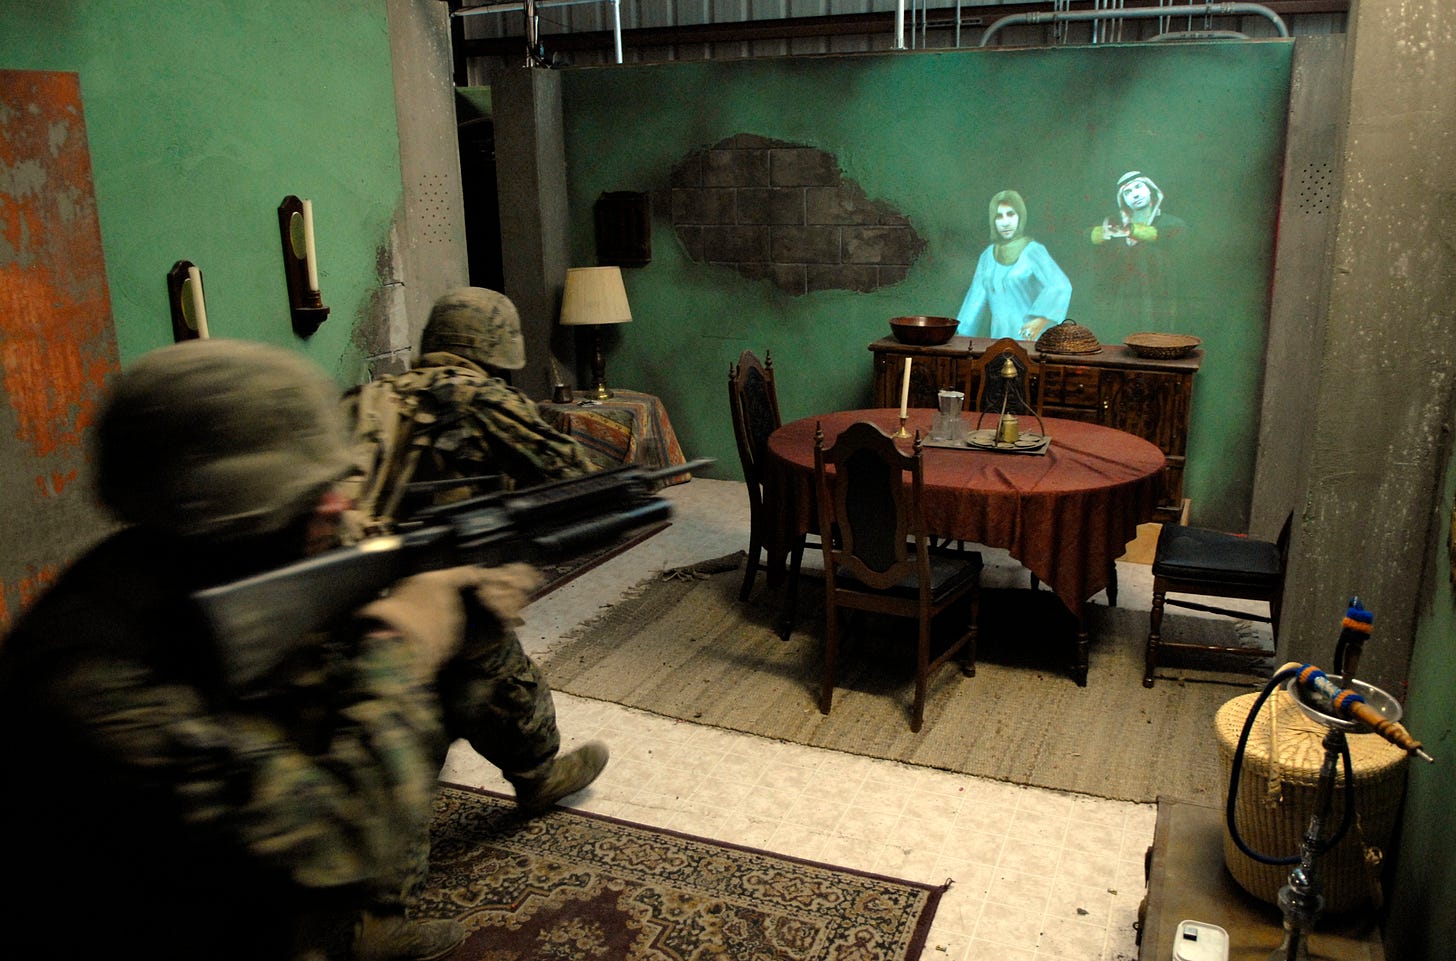 Marines simulate an operation in a staged room, with a dining table, and avatars projected on a wall.